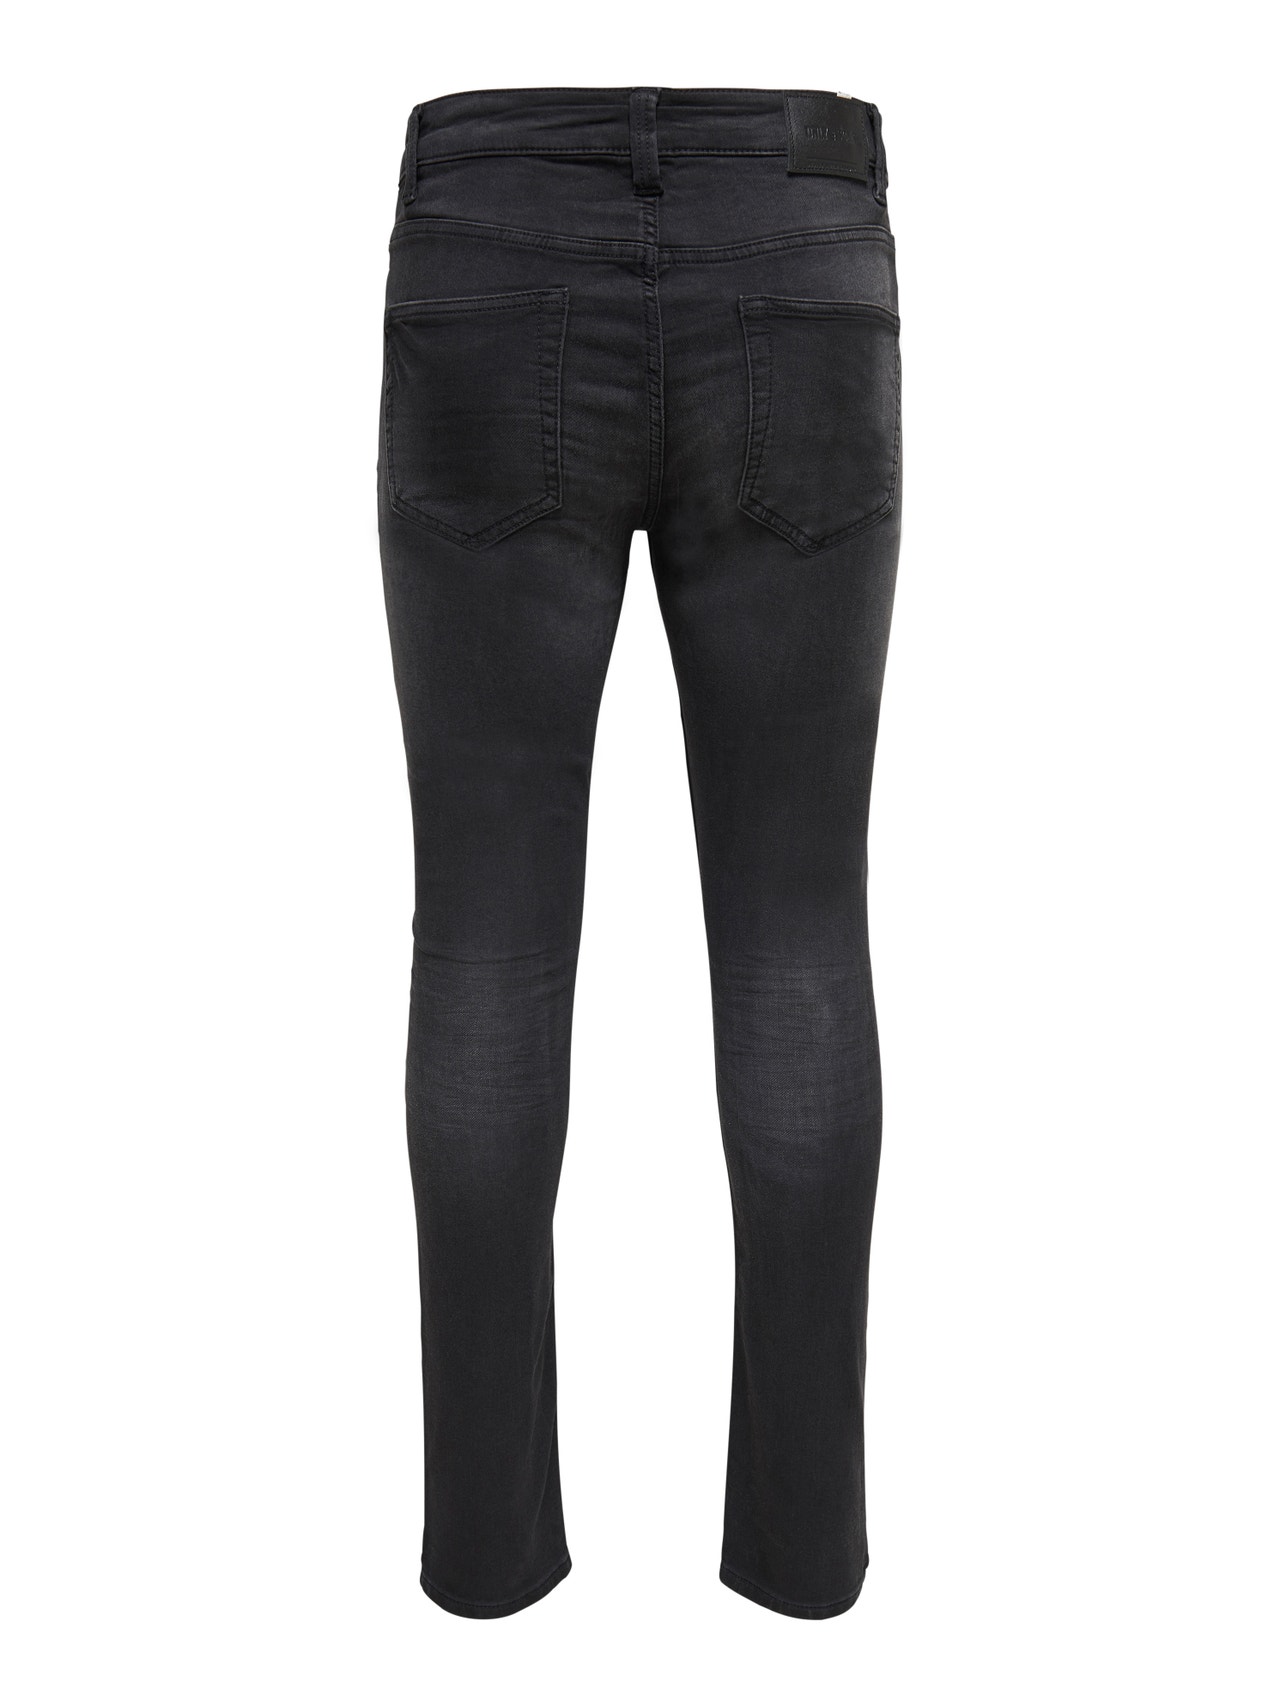 Slim Fit Mid rise Jeans | Black | ONLY & SONS®